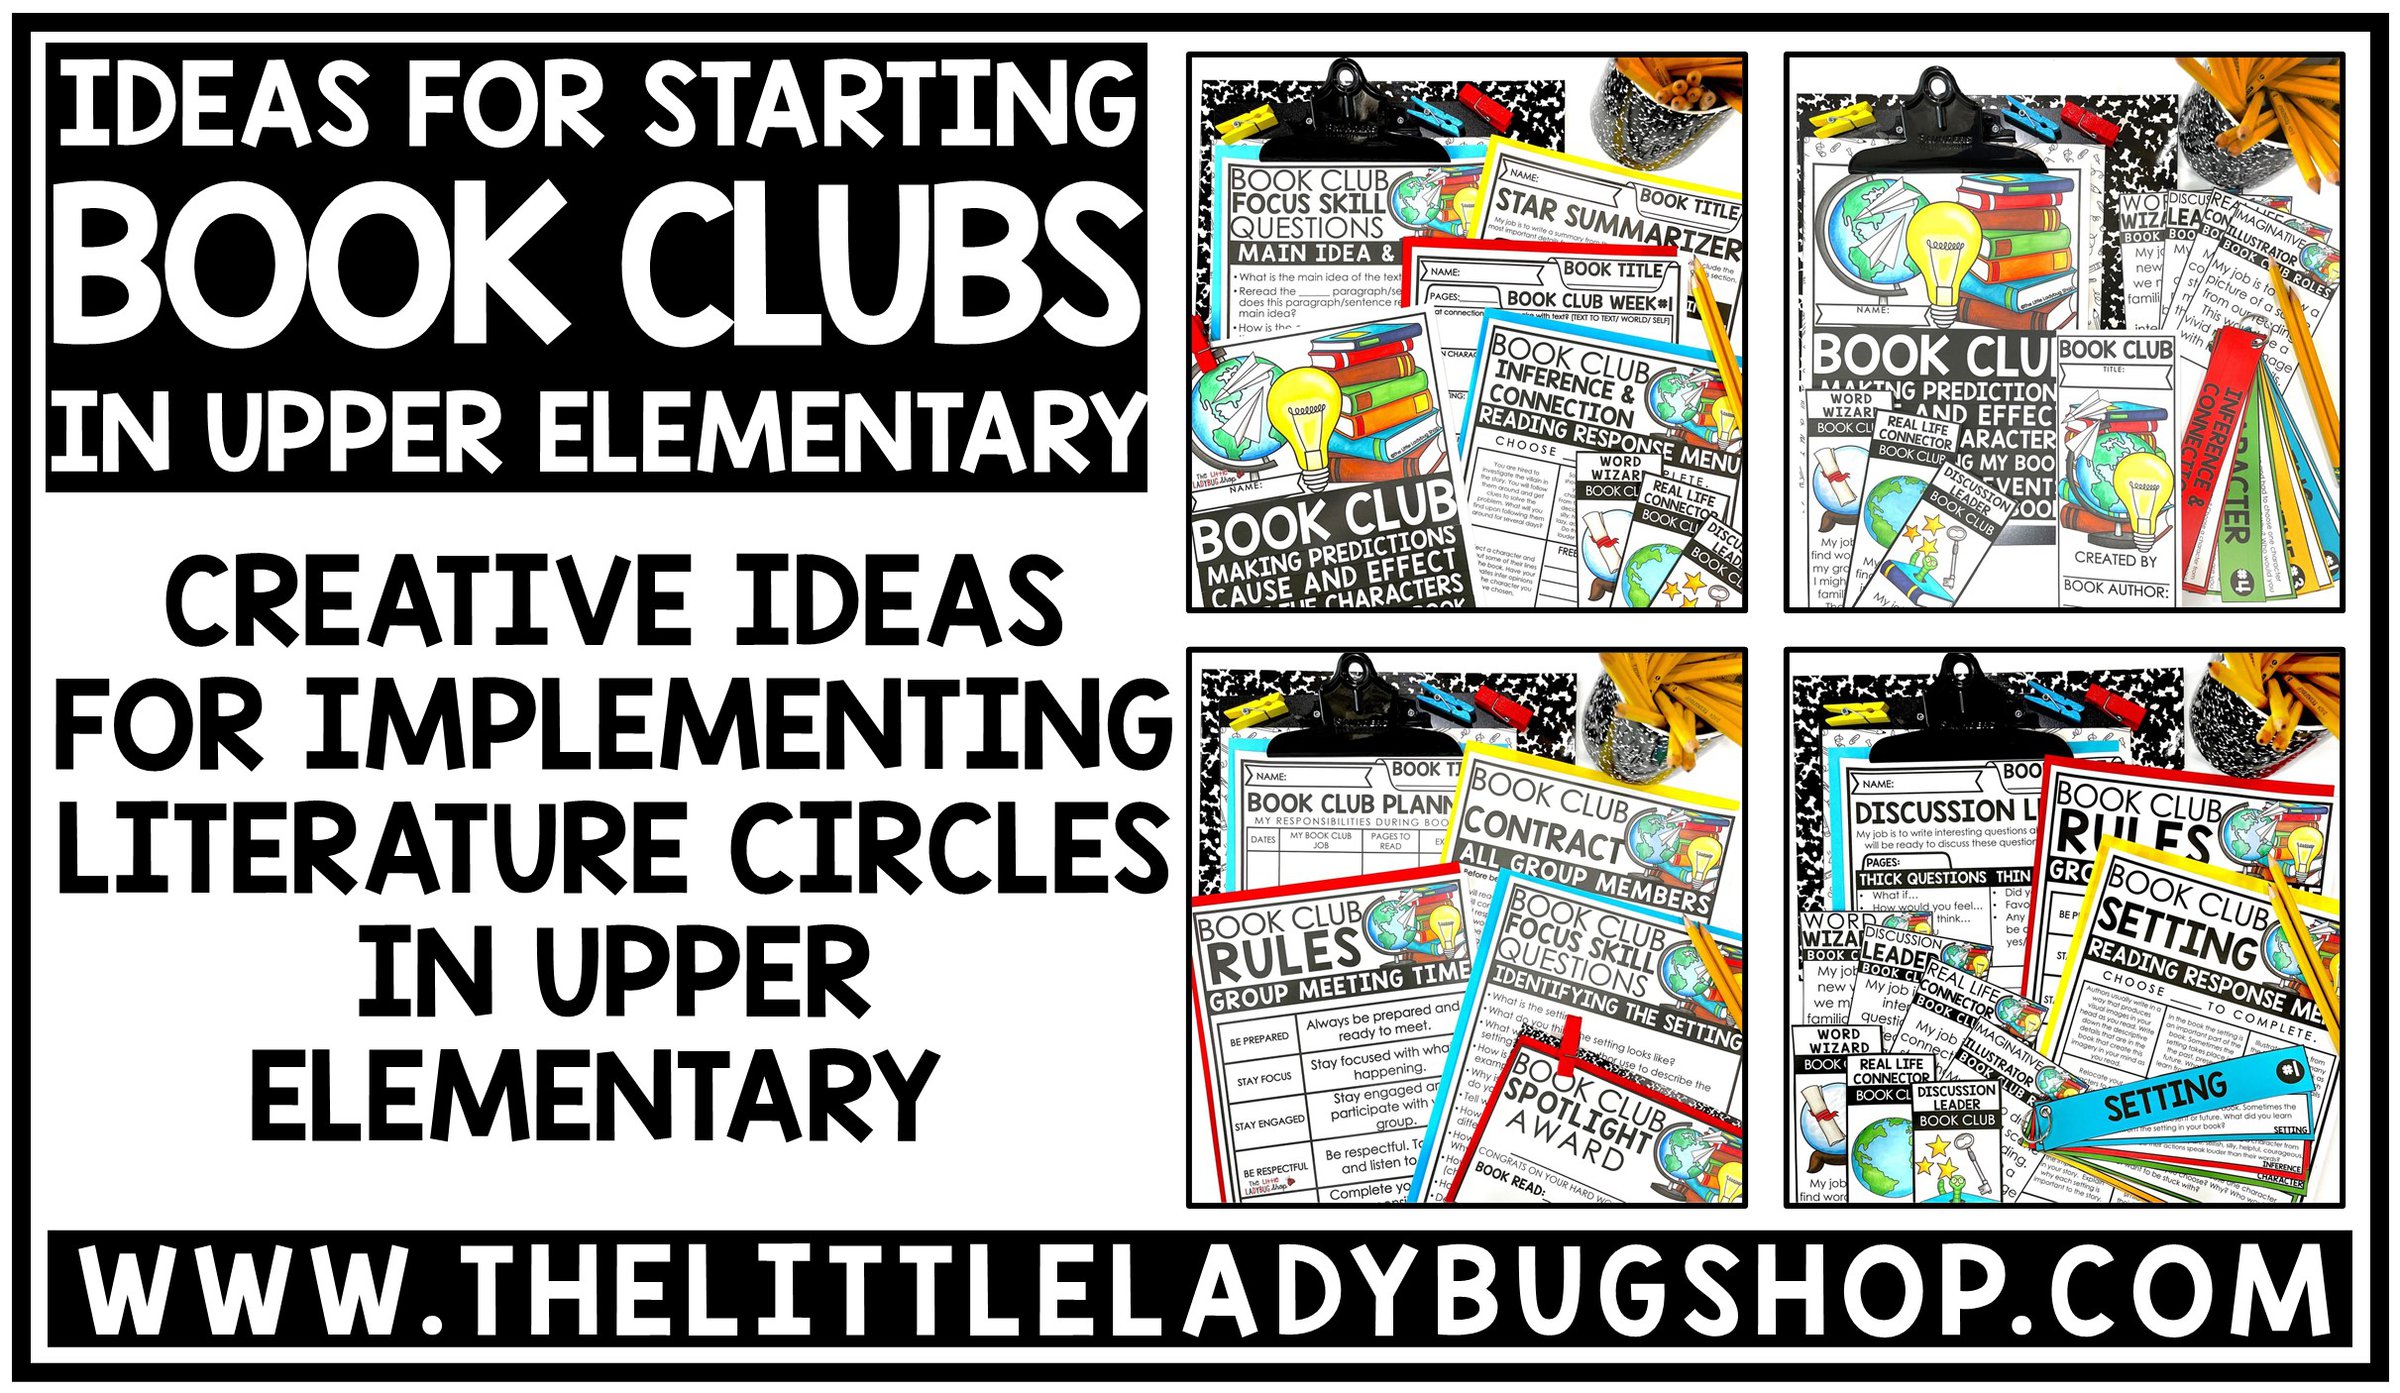 Tips and Ideas for Getting Started with Books Clubs in the Upper Elementary Classroom